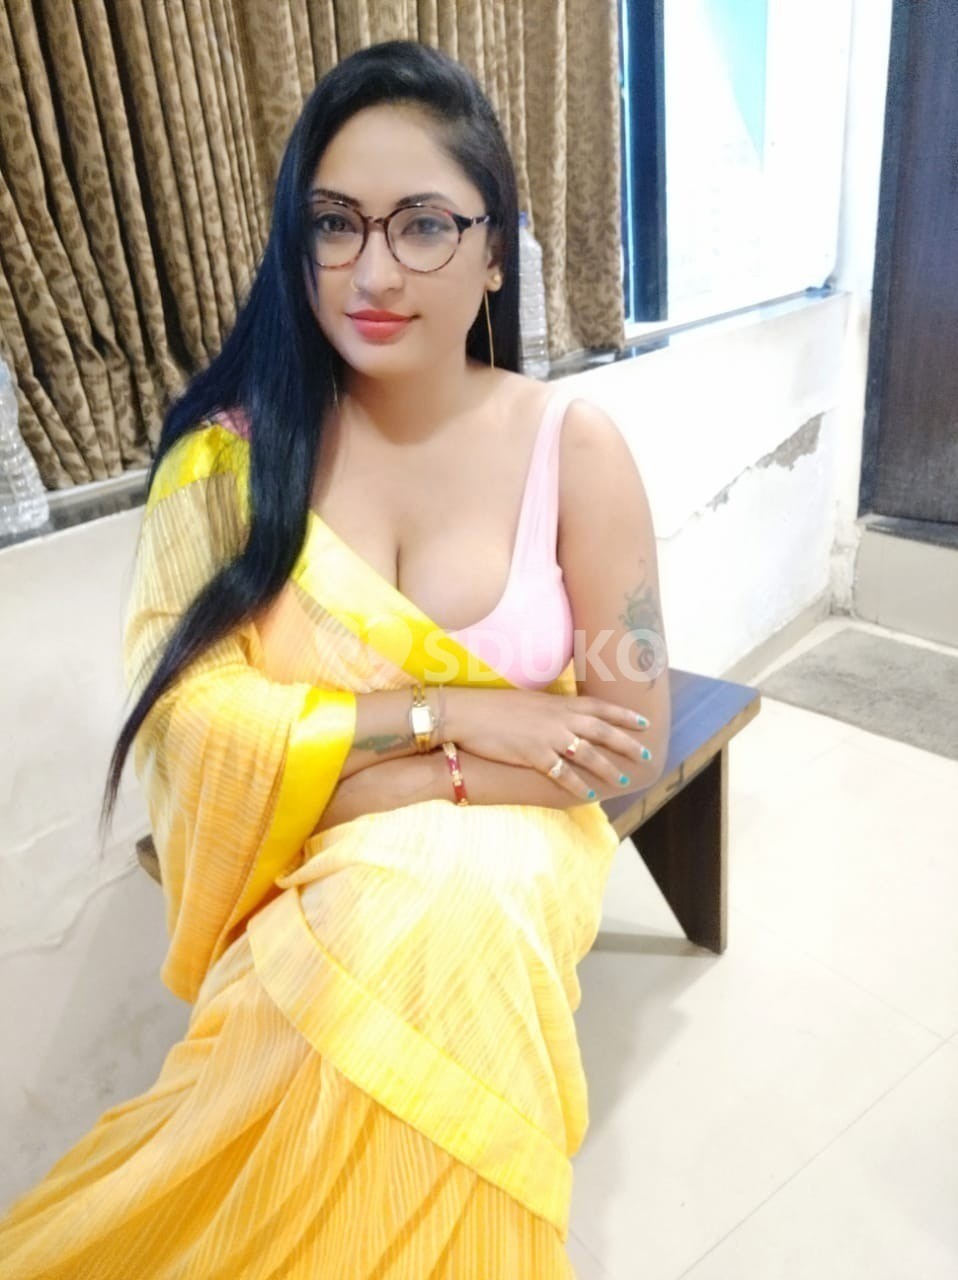 Supriya Pandey LOW PRICE🔸✅ SERVICE AVAILABLE 100% SAFE AND SECURE UNLIMITED ENJOY HOT COLLEGE GIRL HOUSEWIFE AUNTIE